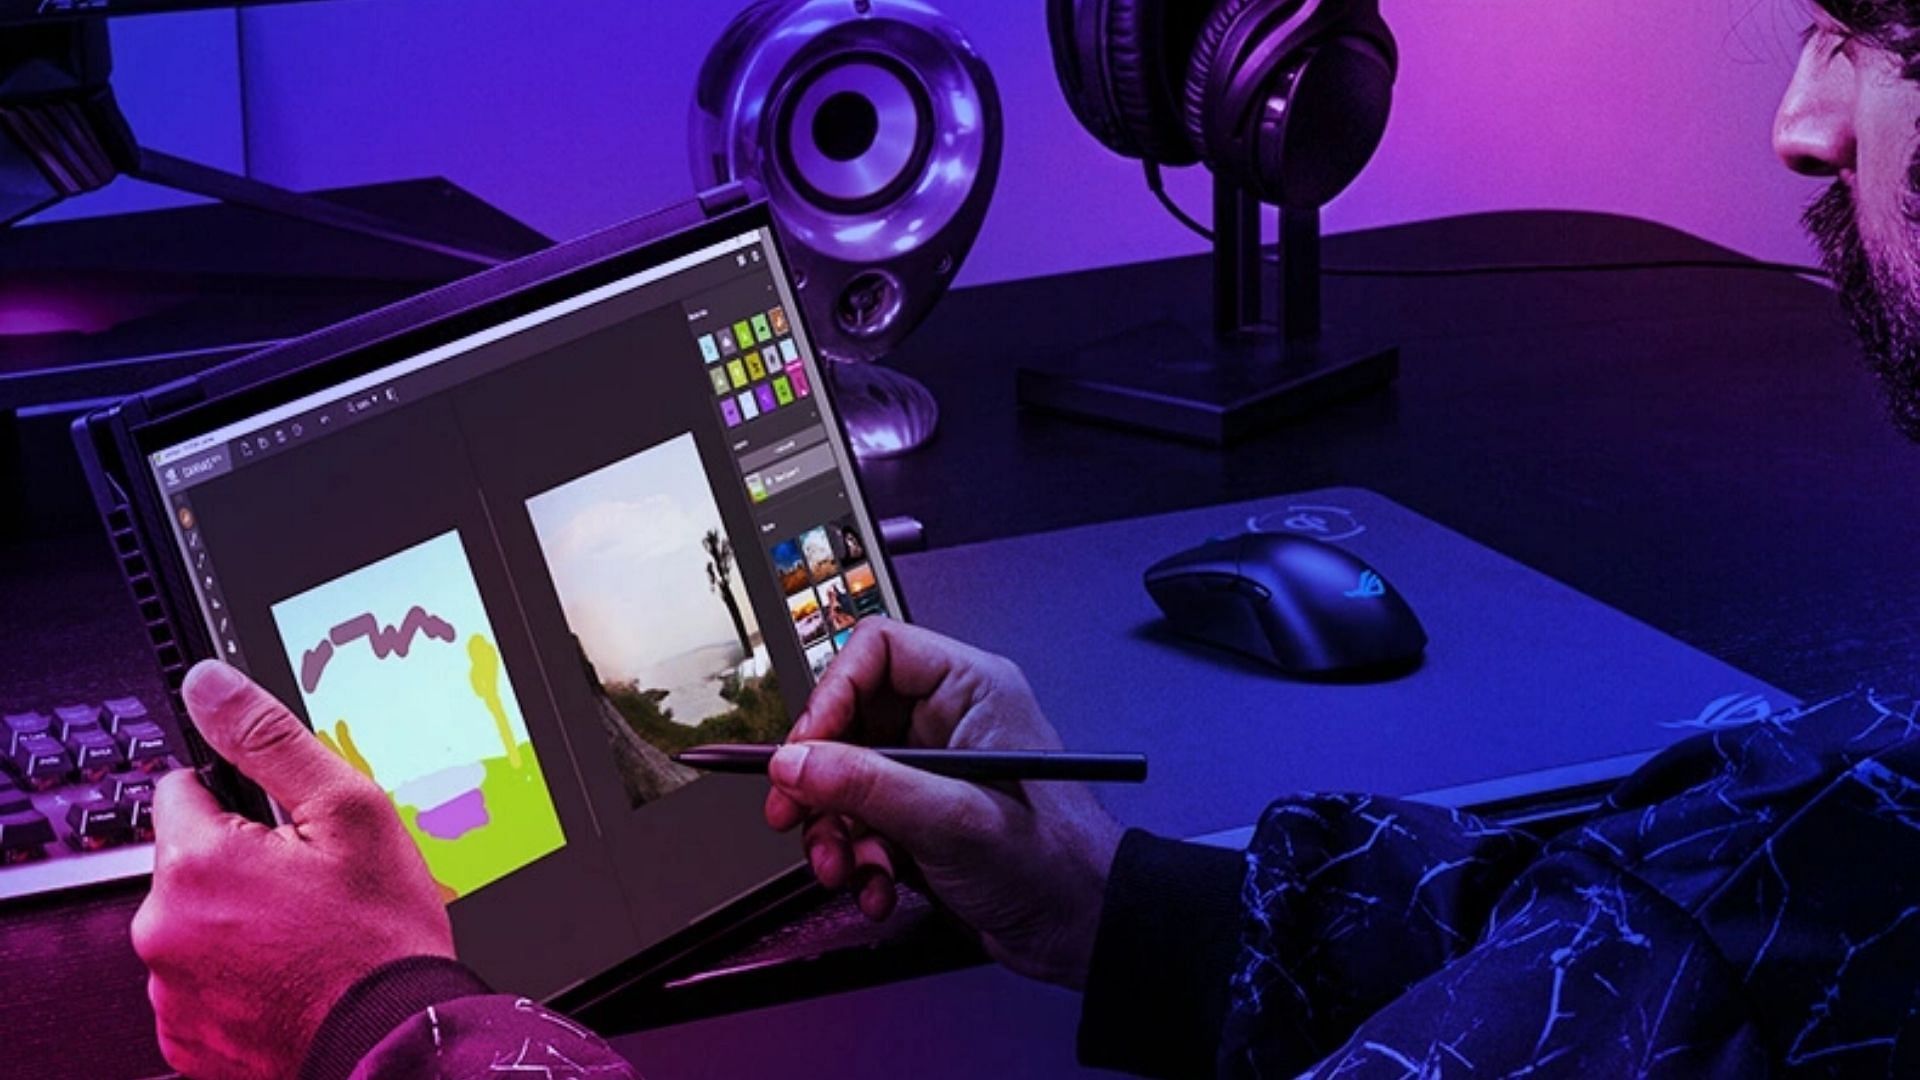 The touchscreen panel on Flow X16 makes it a great laptop for creative work. (Image via Asus)